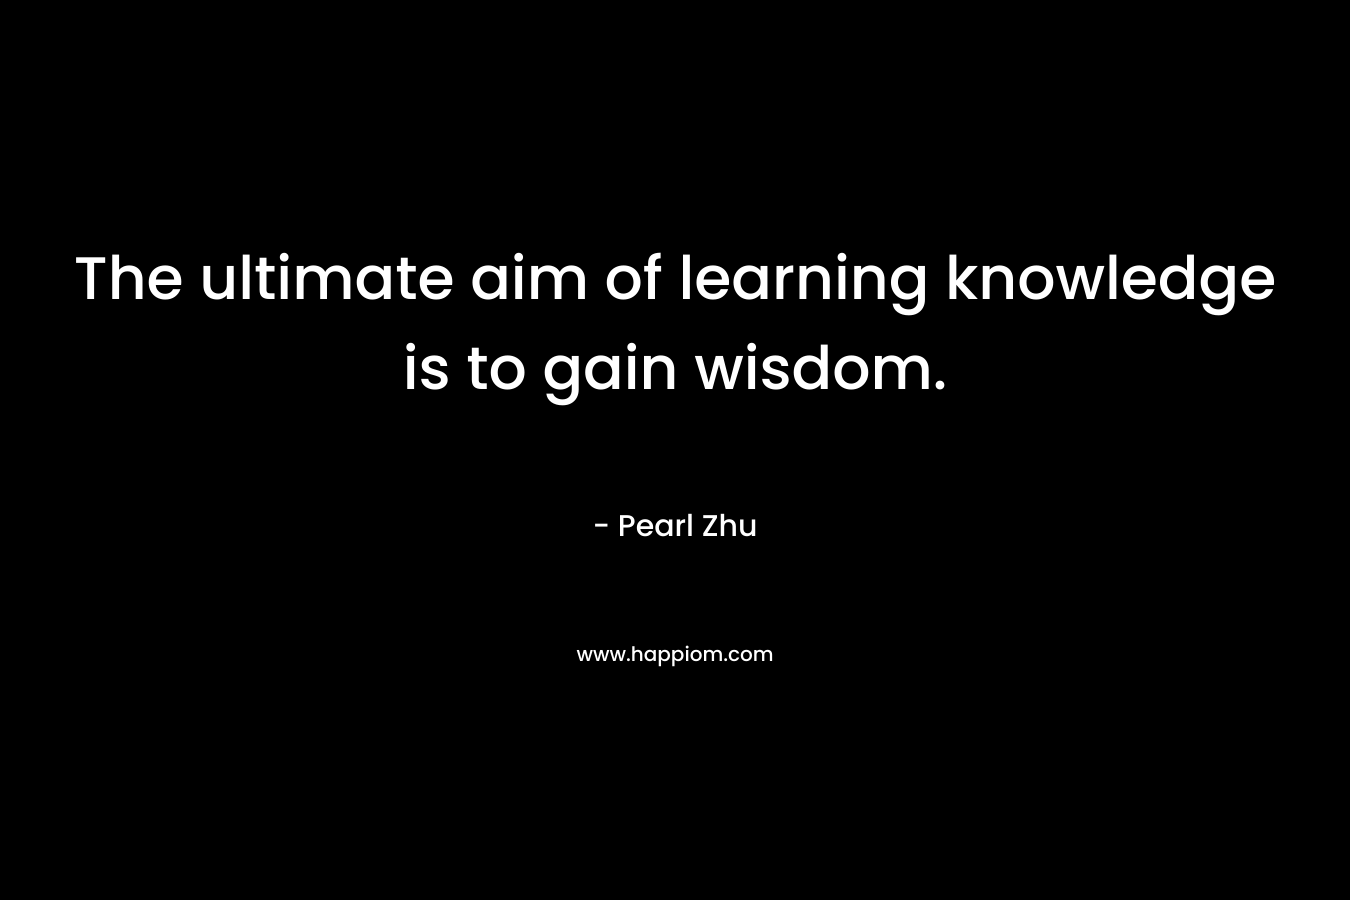 The ultimate aim of learning knowledge is to gain wisdom.